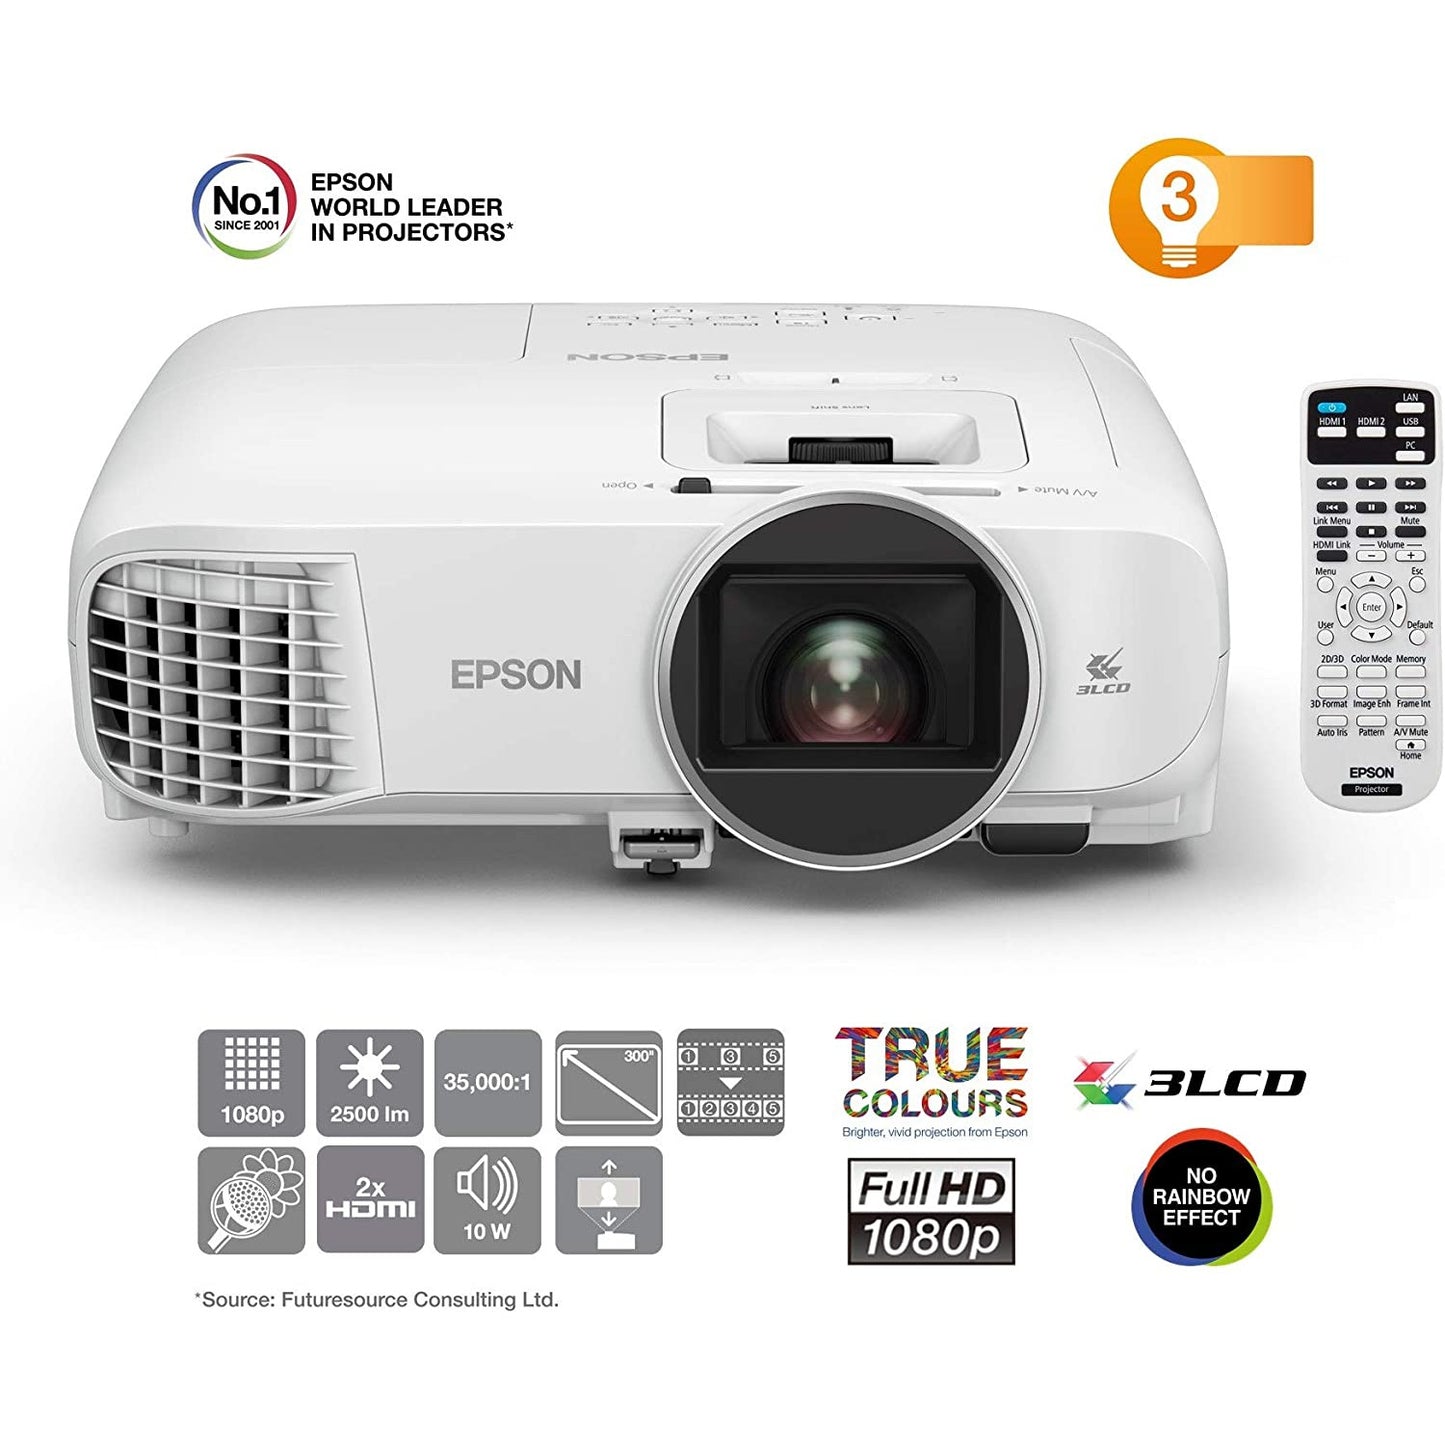 Epson EH-TW5600 3LCD, Full HD, 2500 Lumens, 300 Inch Display, Lens Shift, Home Cinema Projector - White